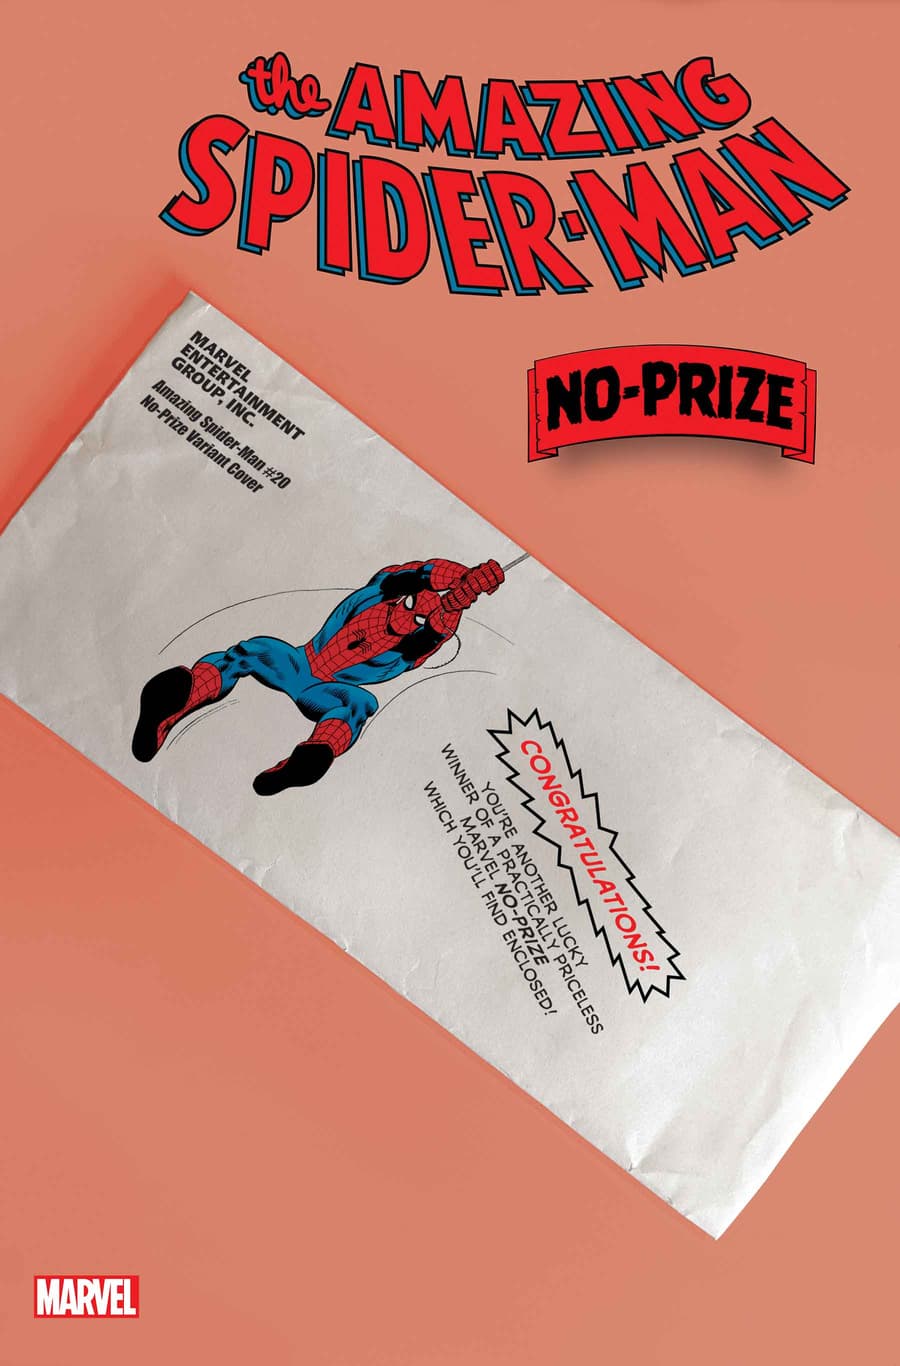 AMAZING SPIDER-MAN #19 No-Prize Variant Cover